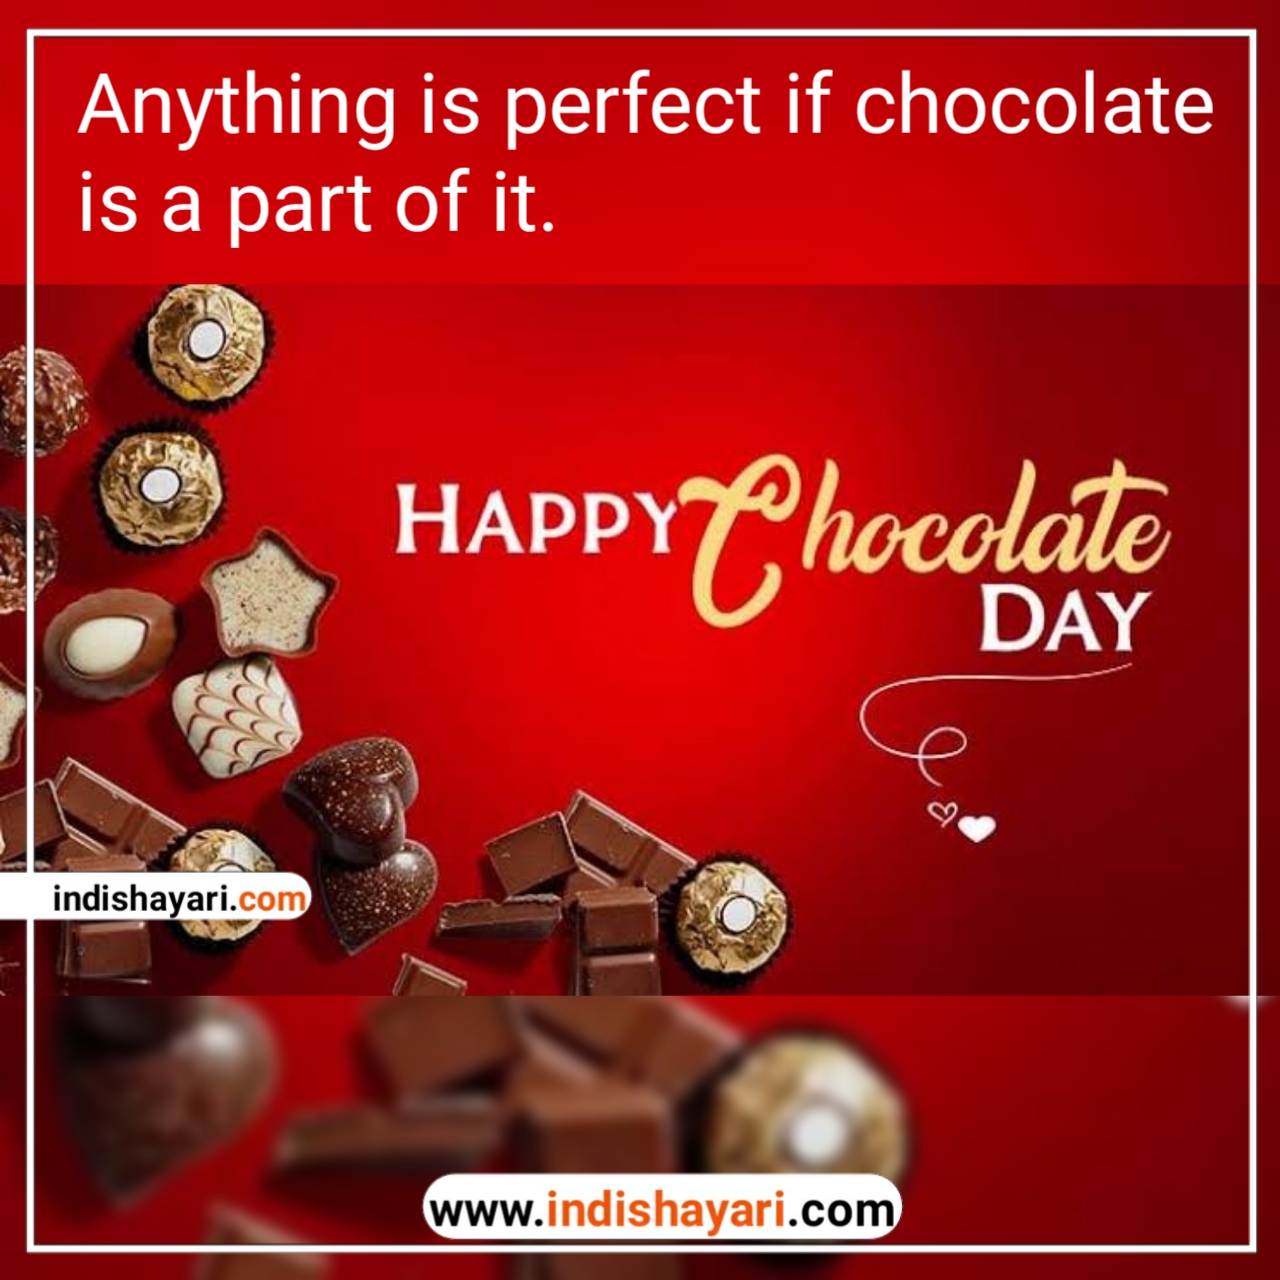 Happy Chocolate Day whishes greetings sms quotes for whatsapp Facebook Instagram status